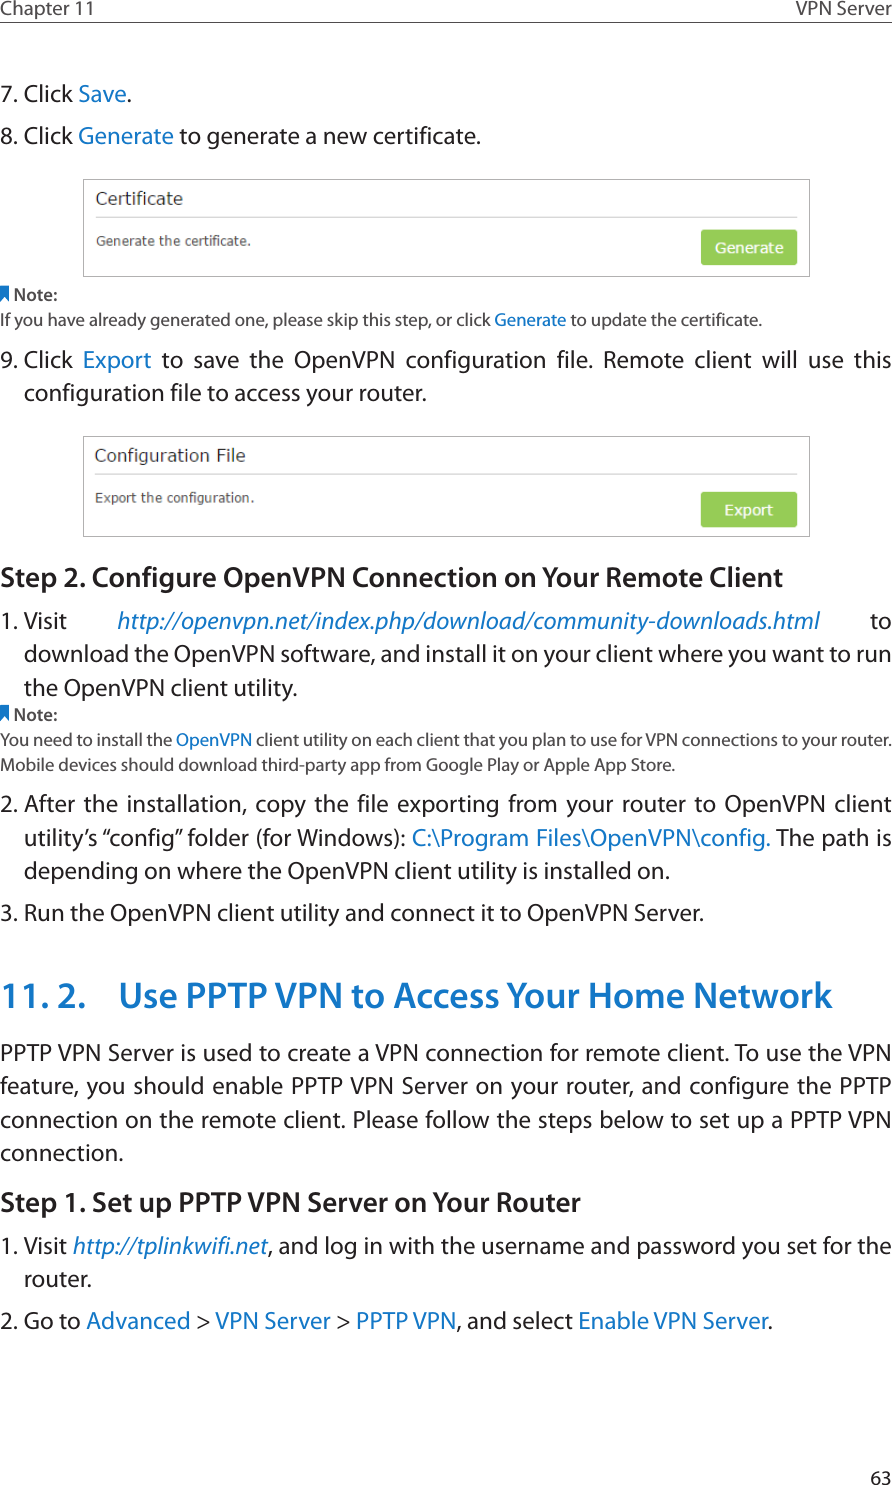 63Chapter 11 VPN Server7. Click Save.8. Click Generate to generate a new certificate. Note:If you have already generated one, please skip this step, or click Generate to update the certificate.9. Click  Export to save the OpenVPN configuration file. Remote client will use this configuration file to access your router.Step 2. Configure OpenVPN Connection on Your Remote Client1. Visit  http://openvpn.net/index.php/download/community-downloads.html to download the OpenVPN software, and install it on your client where you want to run the OpenVPN client utility.Note:You need to install the OpenVPN client utility on each client that you plan to use for VPN connections to your router. Mobile devices should download third-party app from Google Play or Apple App Store.2. After the installation, copy the file exporting from your router to OpenVPN client utility’s “config” folder (for Windows): C:\Program Files\OpenVPN\config. The path is depending on where the OpenVPN client utility is installed on.3. Run the OpenVPN client utility and connect it to OpenVPN Server.11. 2.  Use PPTP VPN to Access Your Home NetworkPPTP VPN Server is used to create a VPN connection for remote client. To use the VPN feature, you should enable PPTP VPN Server on your router, and configure the PPTP connection on the remote client. Please follow the steps below to set up a PPTP VPN connection.Step 1. Set up PPTP VPN Server on Your Router1. Visit http://tplinkwifi.net, and log in with the username and password you set for the router.2. Go to Advanced &gt; VPN Server &gt; PPTP VPN, and select Enable VPN Server.